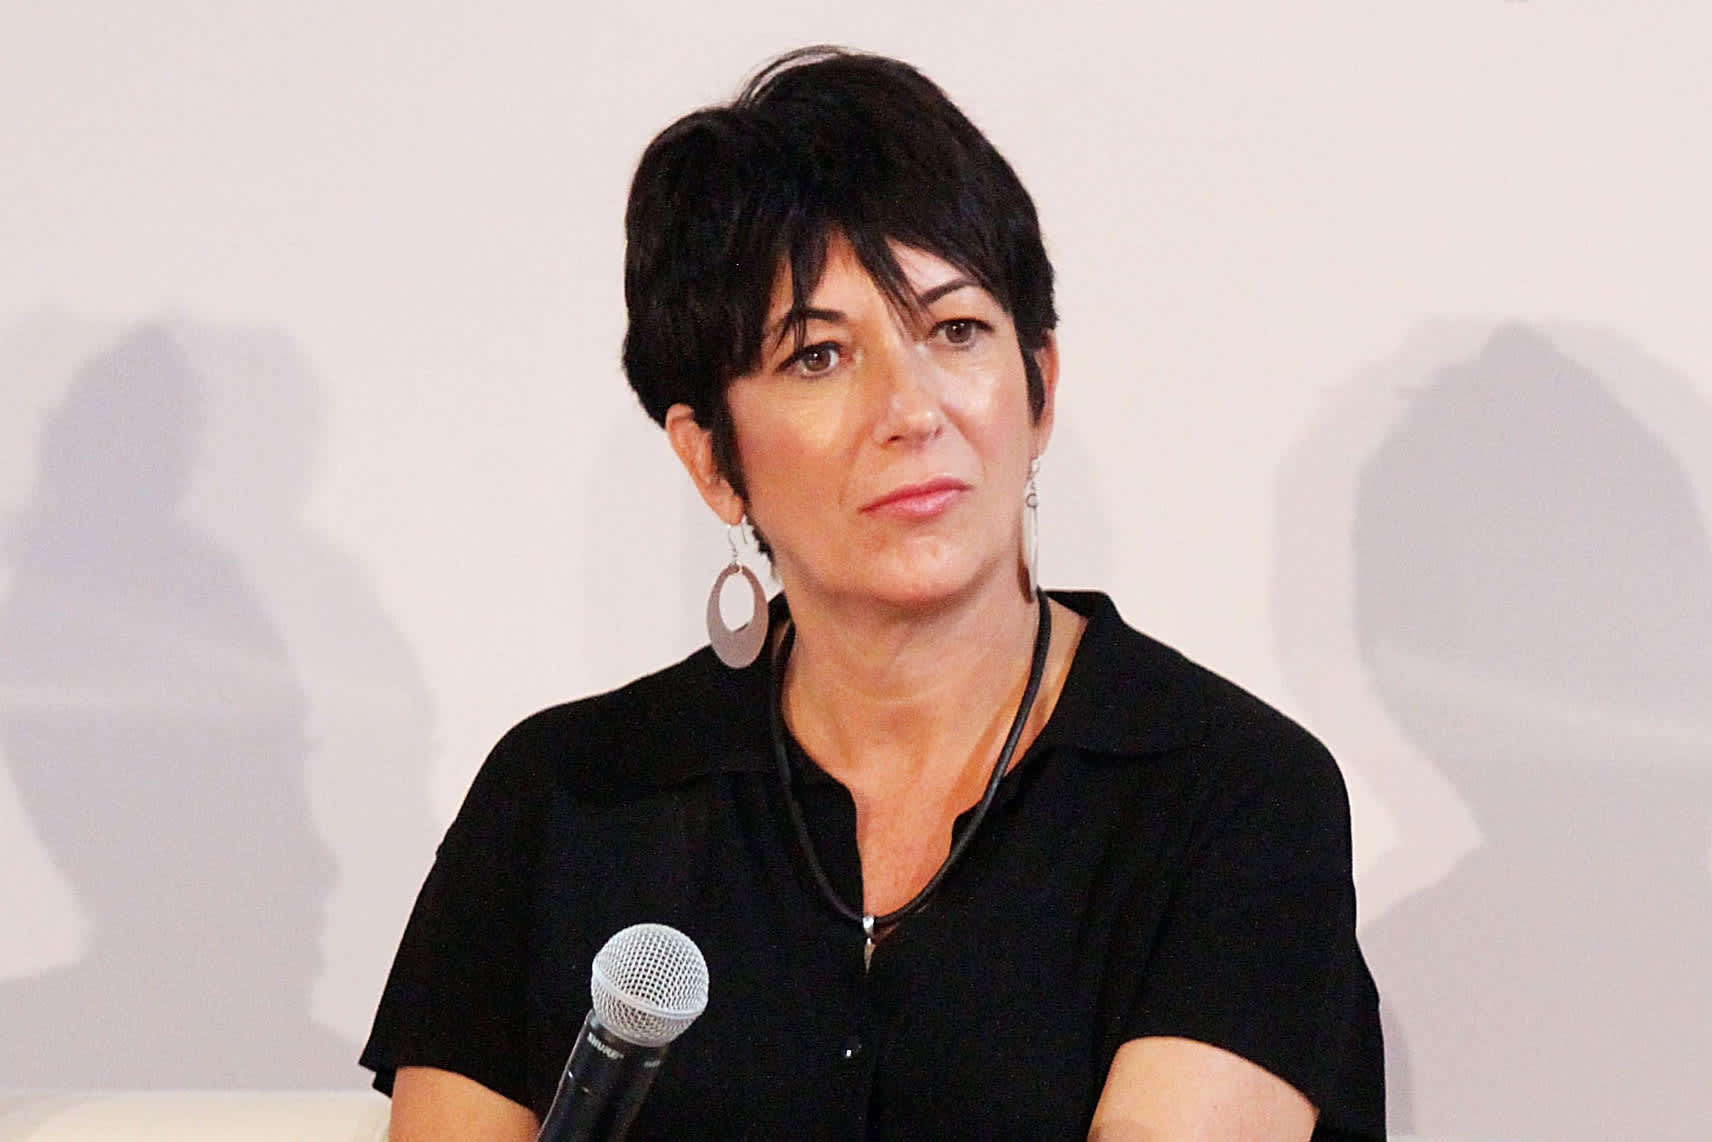 Ghislaine Maxwell loses key rulings ahead of trial for Jeffrey Epstein sex crime..